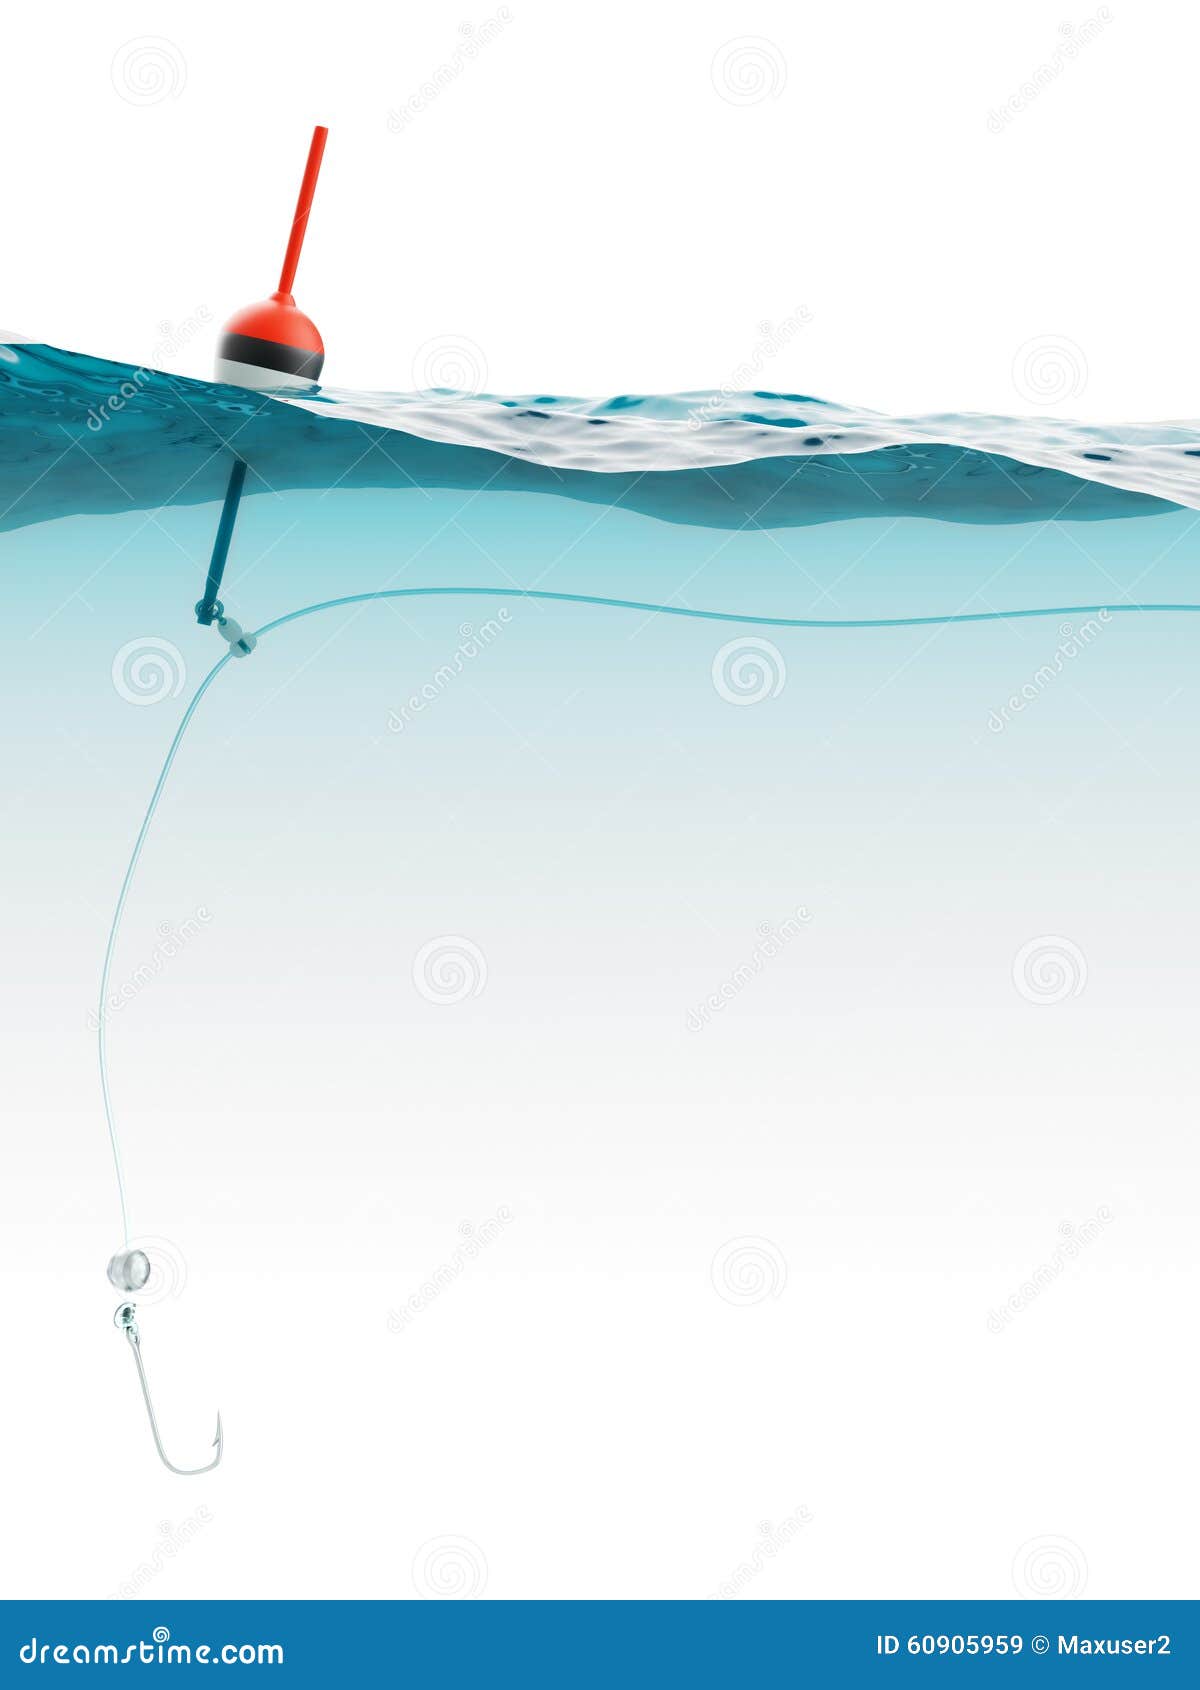 Bobber with Fishing Line and Hook Under Water Stock Illustration